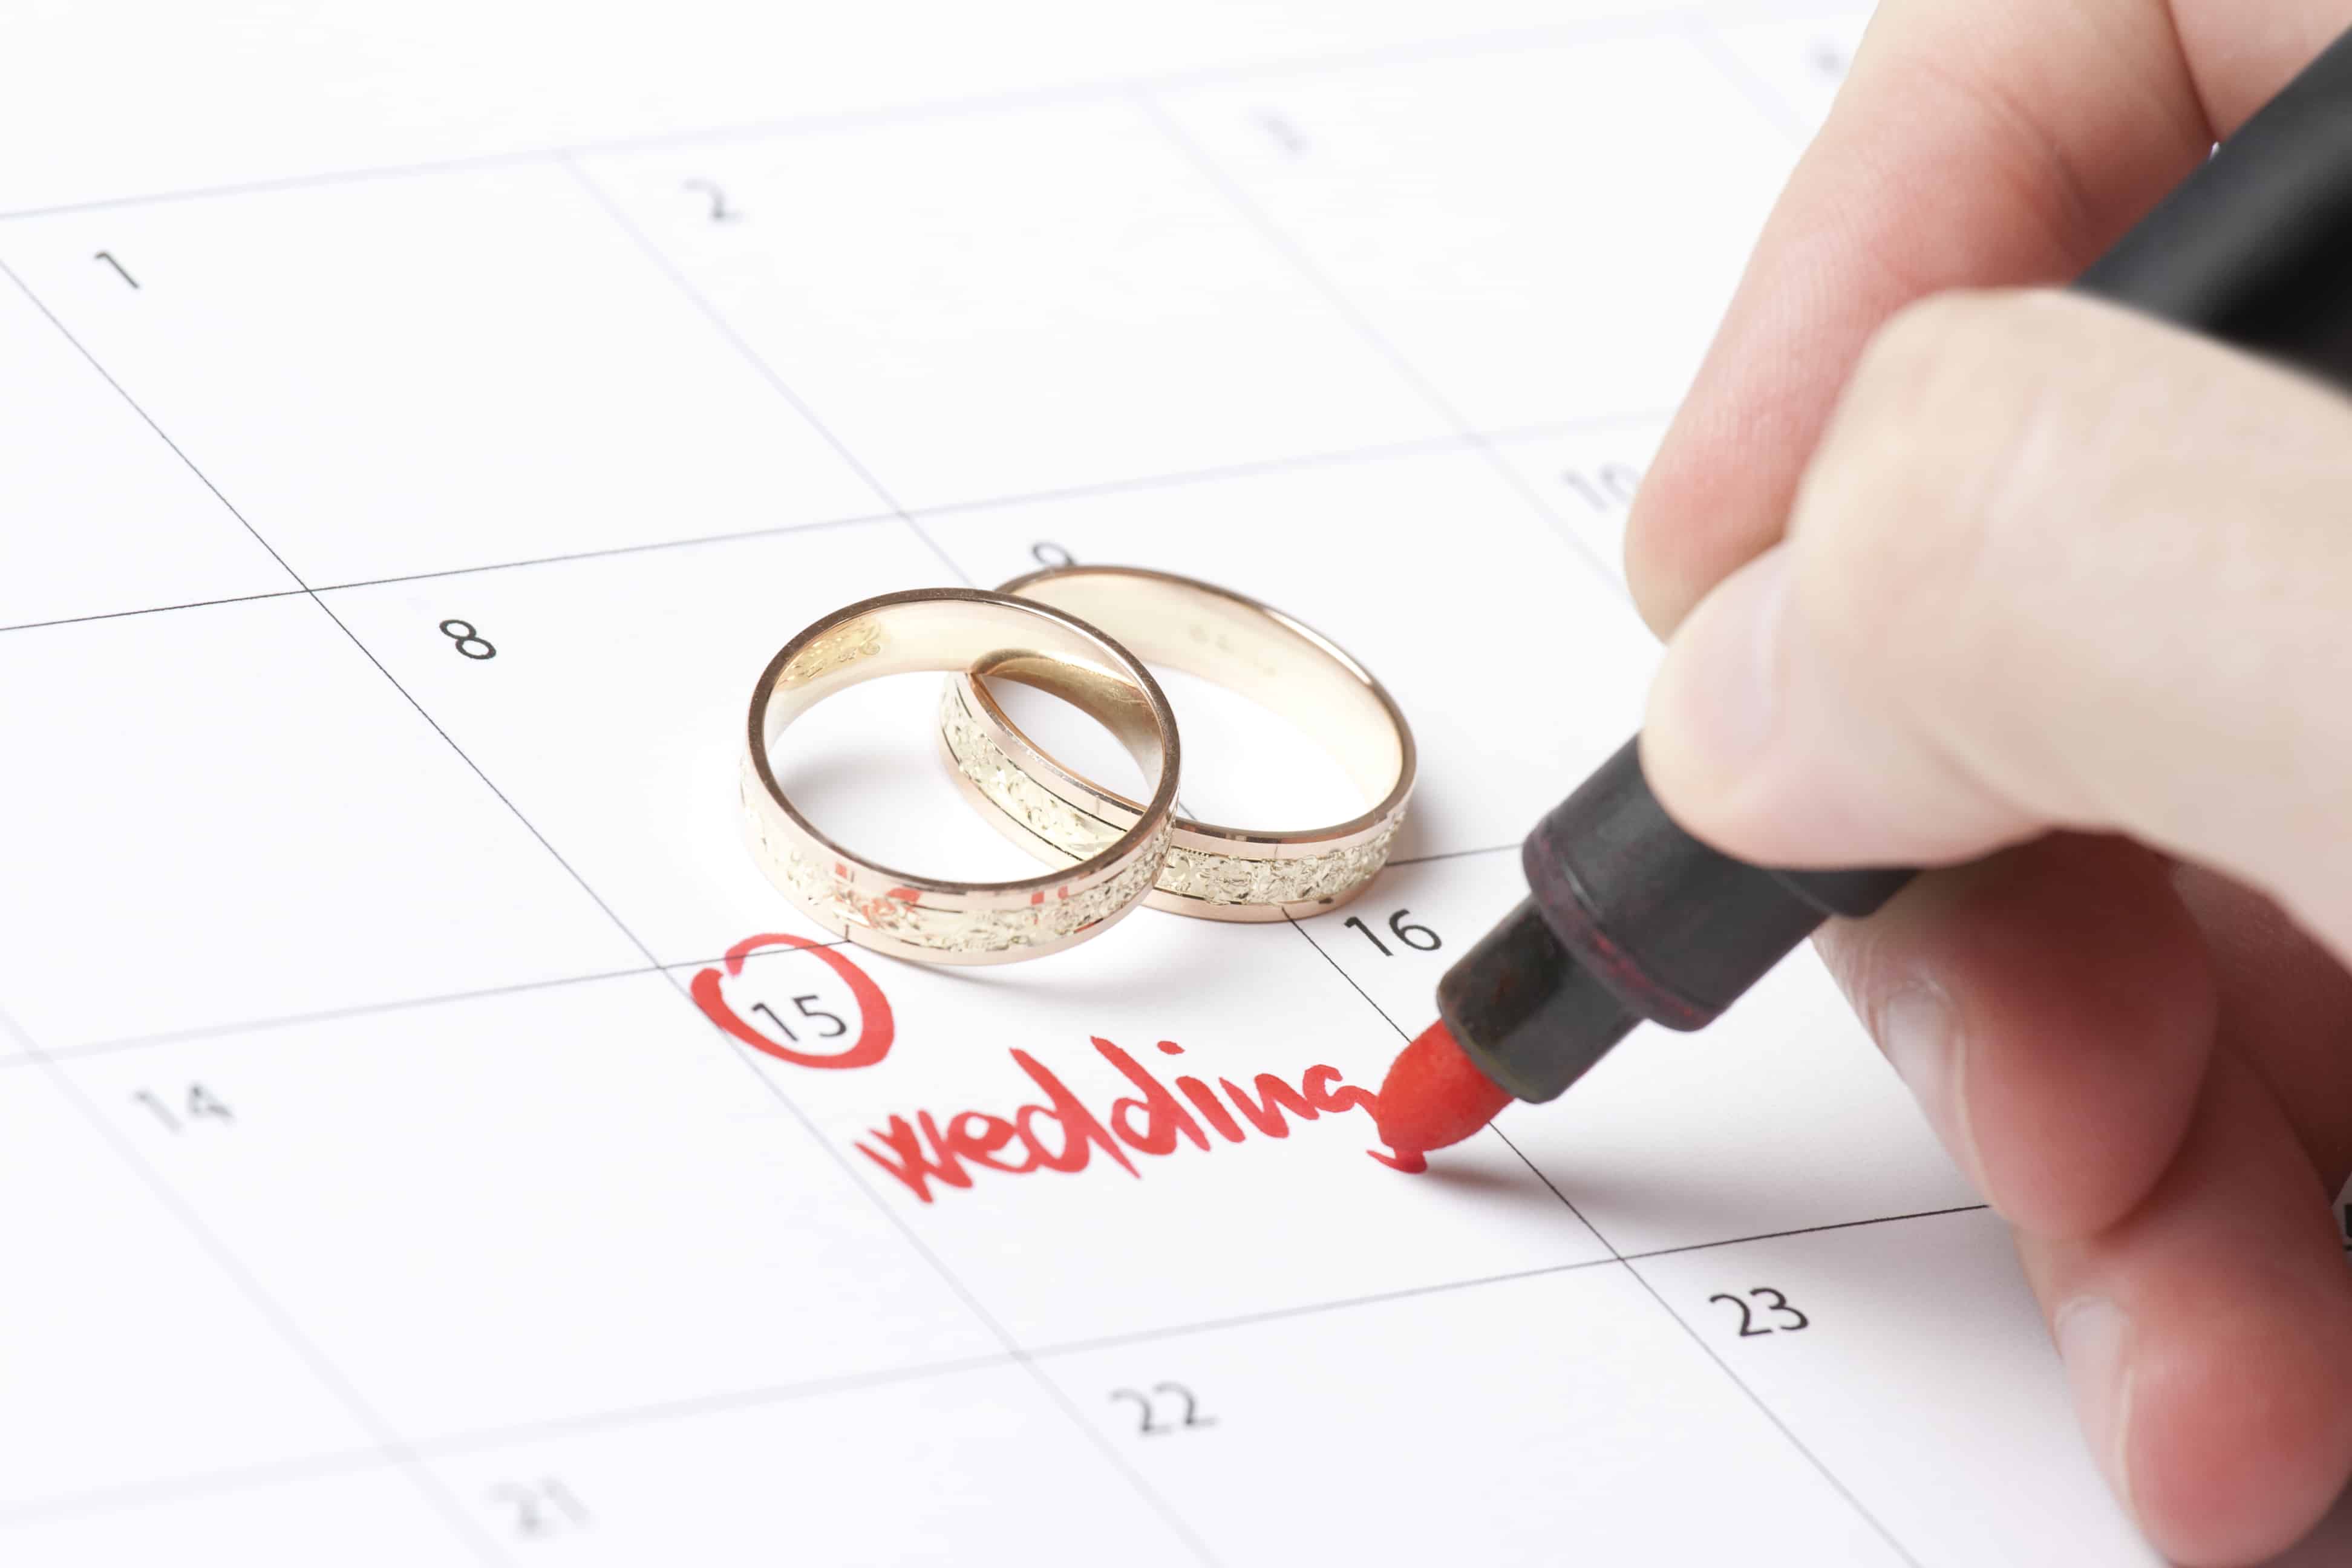 Getting started with planning a wedding